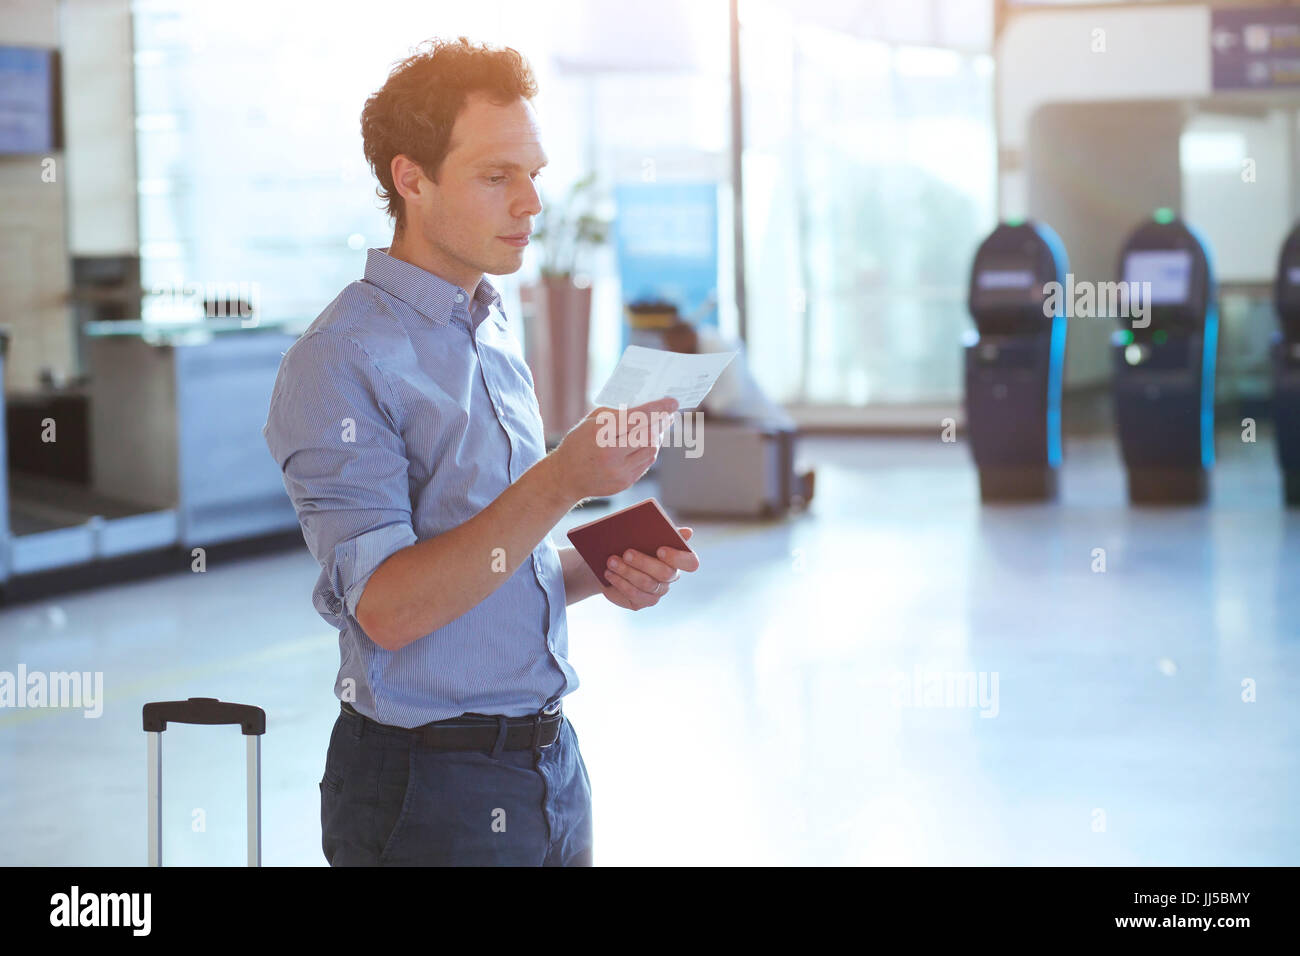 man checking boarding pass and number of gate in the airport Stock Photo